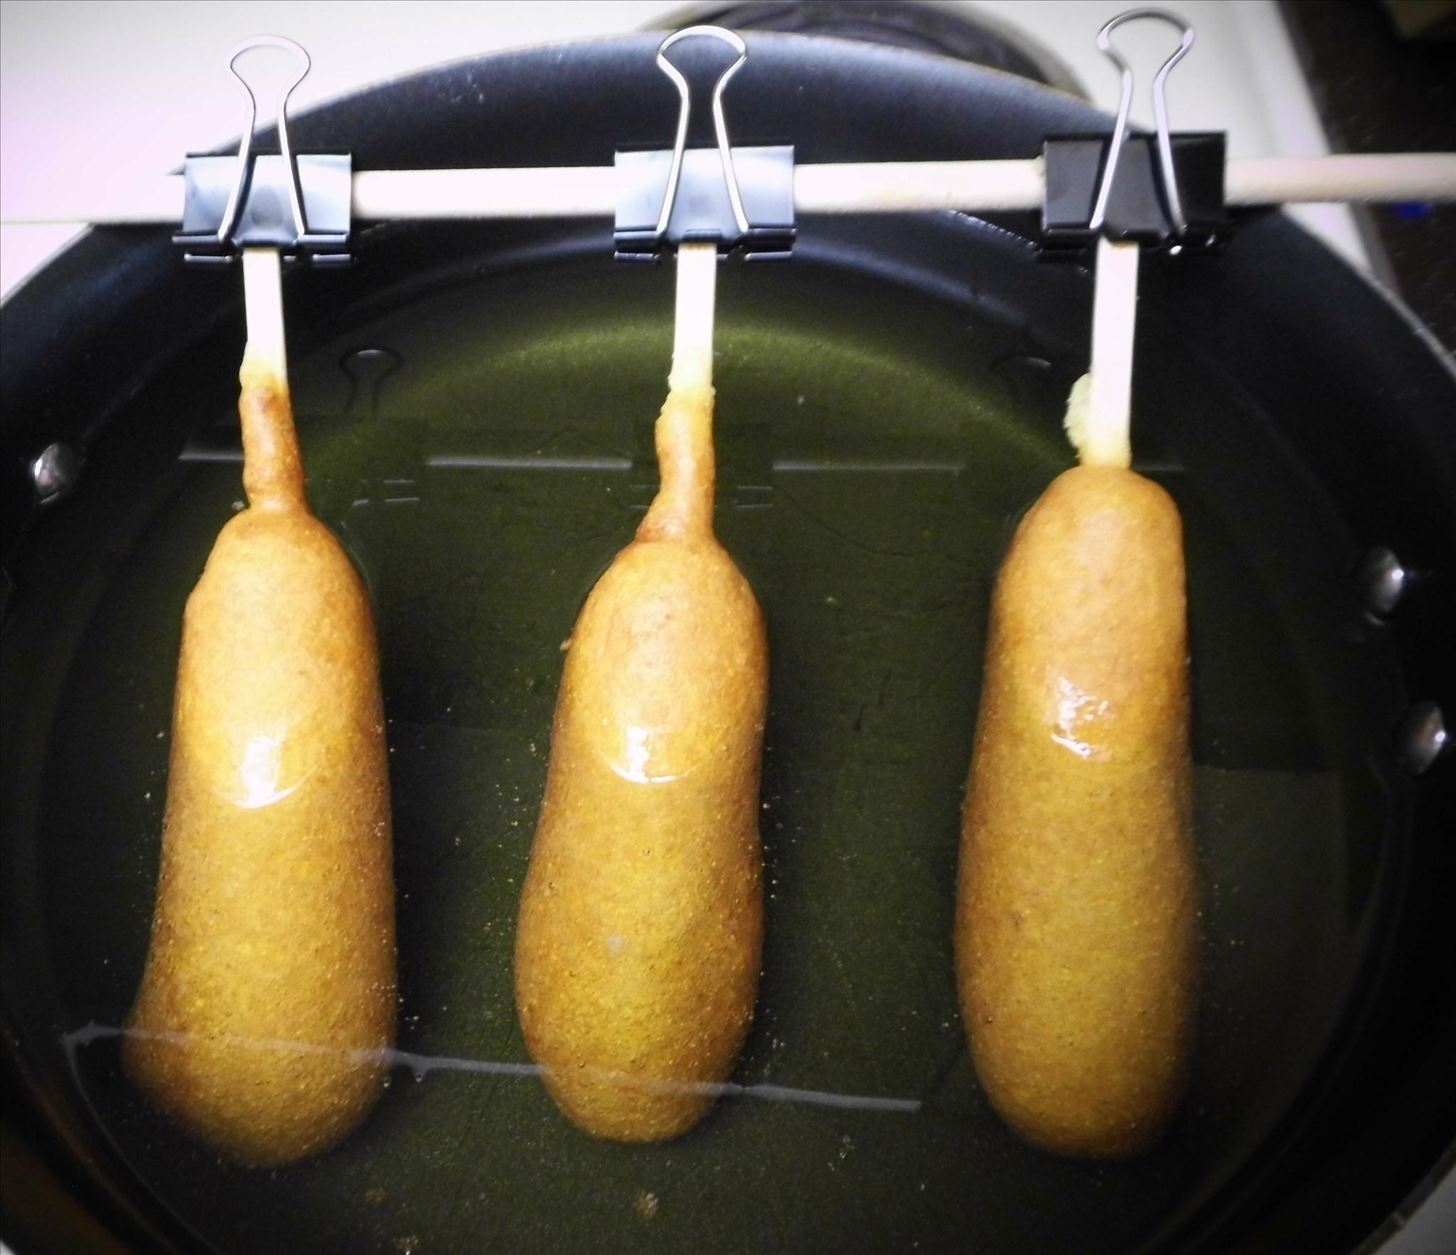 How to Build a Corn Dog Rig for Easy Deep Frying